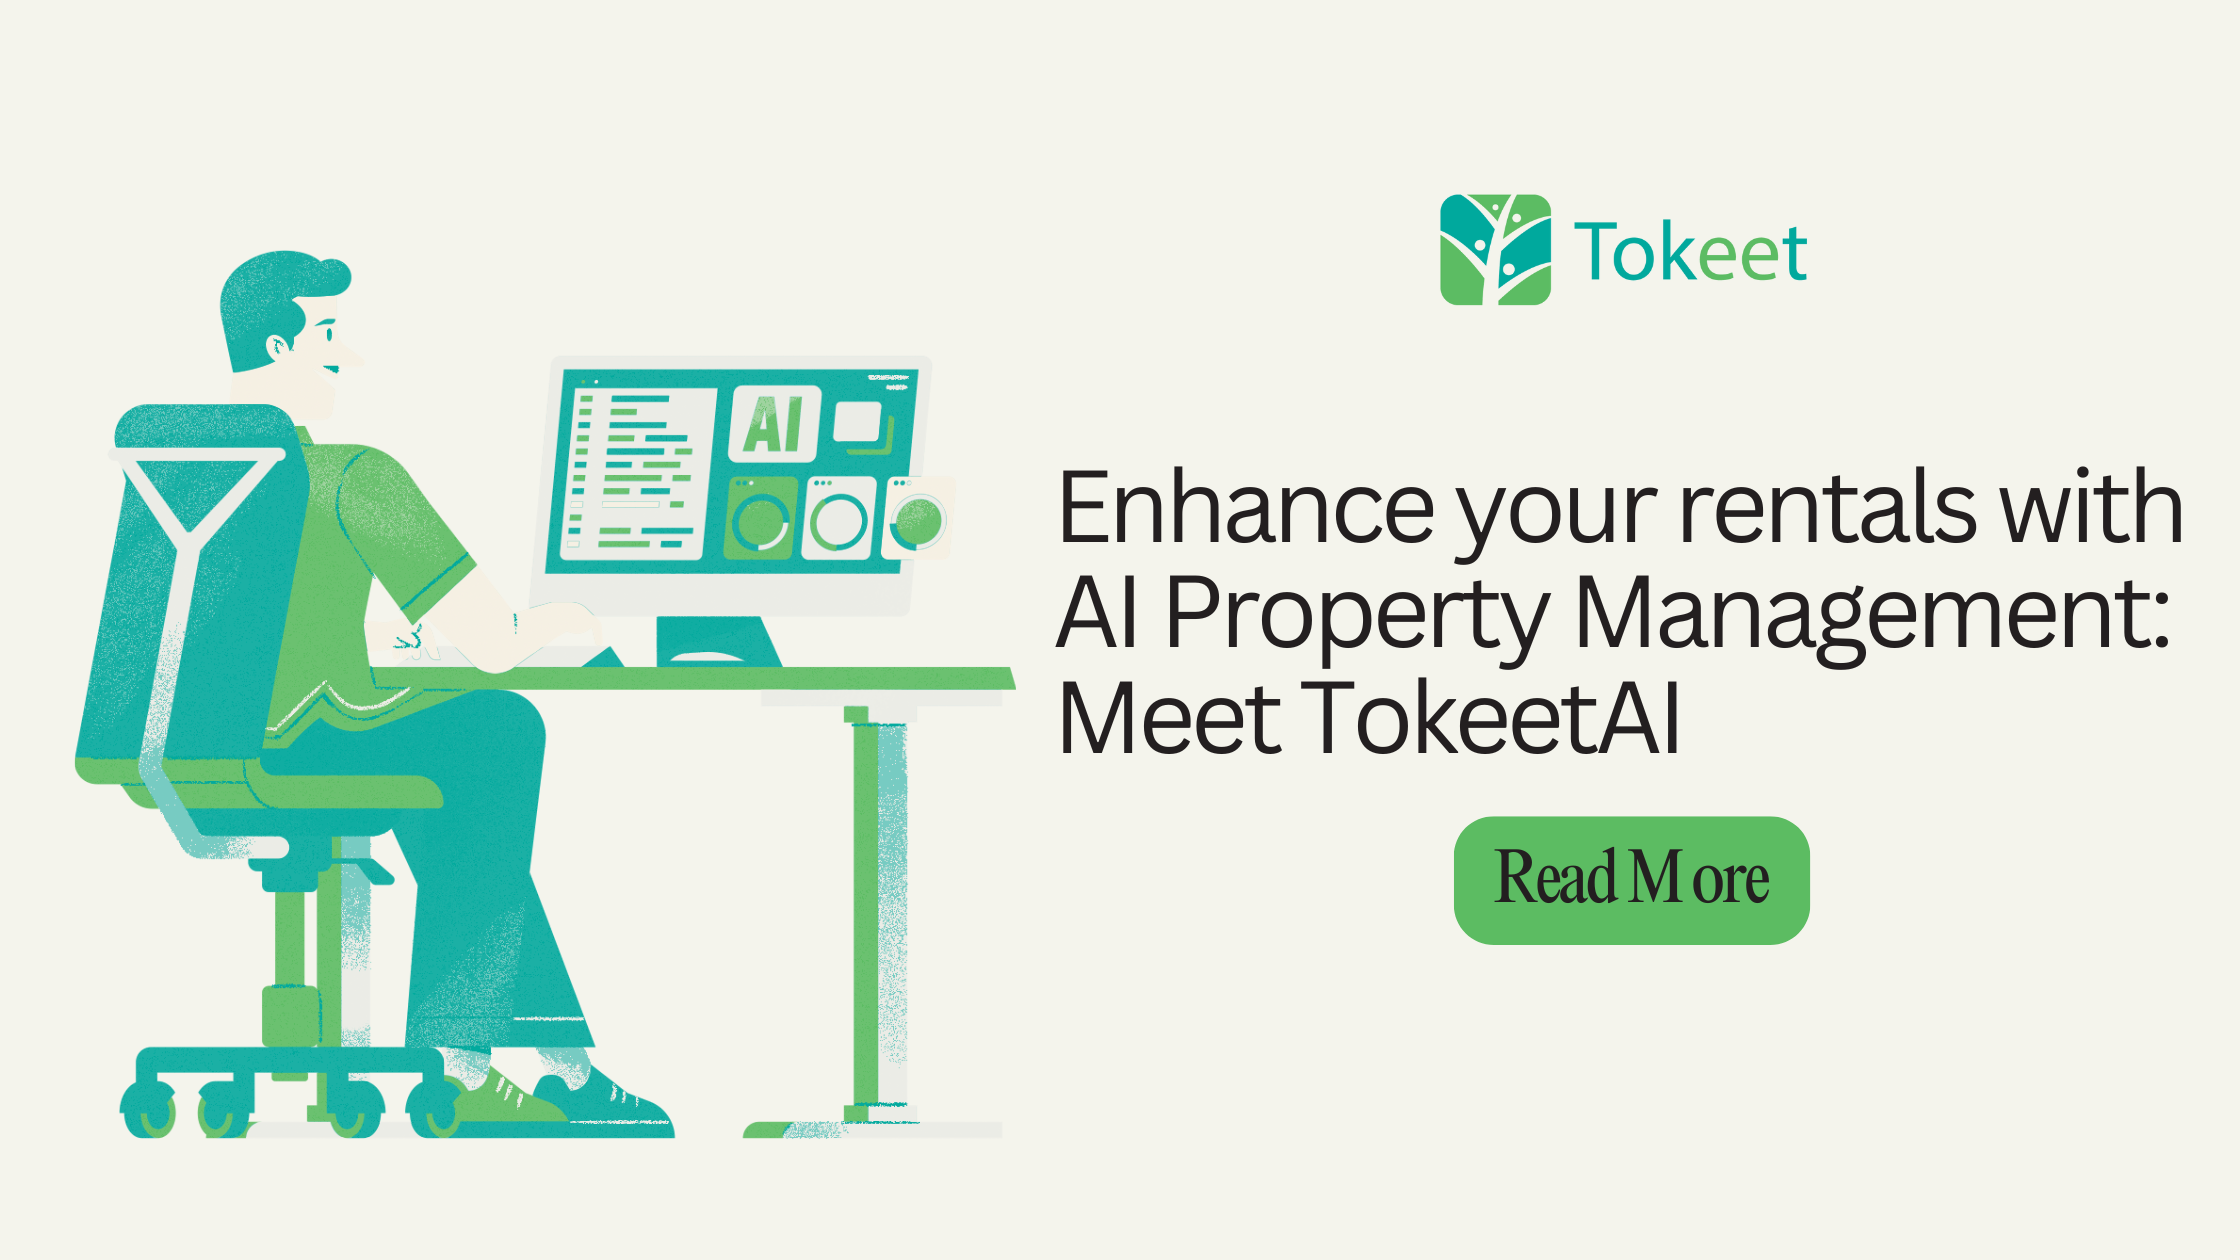 Illustration of a person using a computer with AI property management software, promoting TokeetAI to enhance rentals written on side